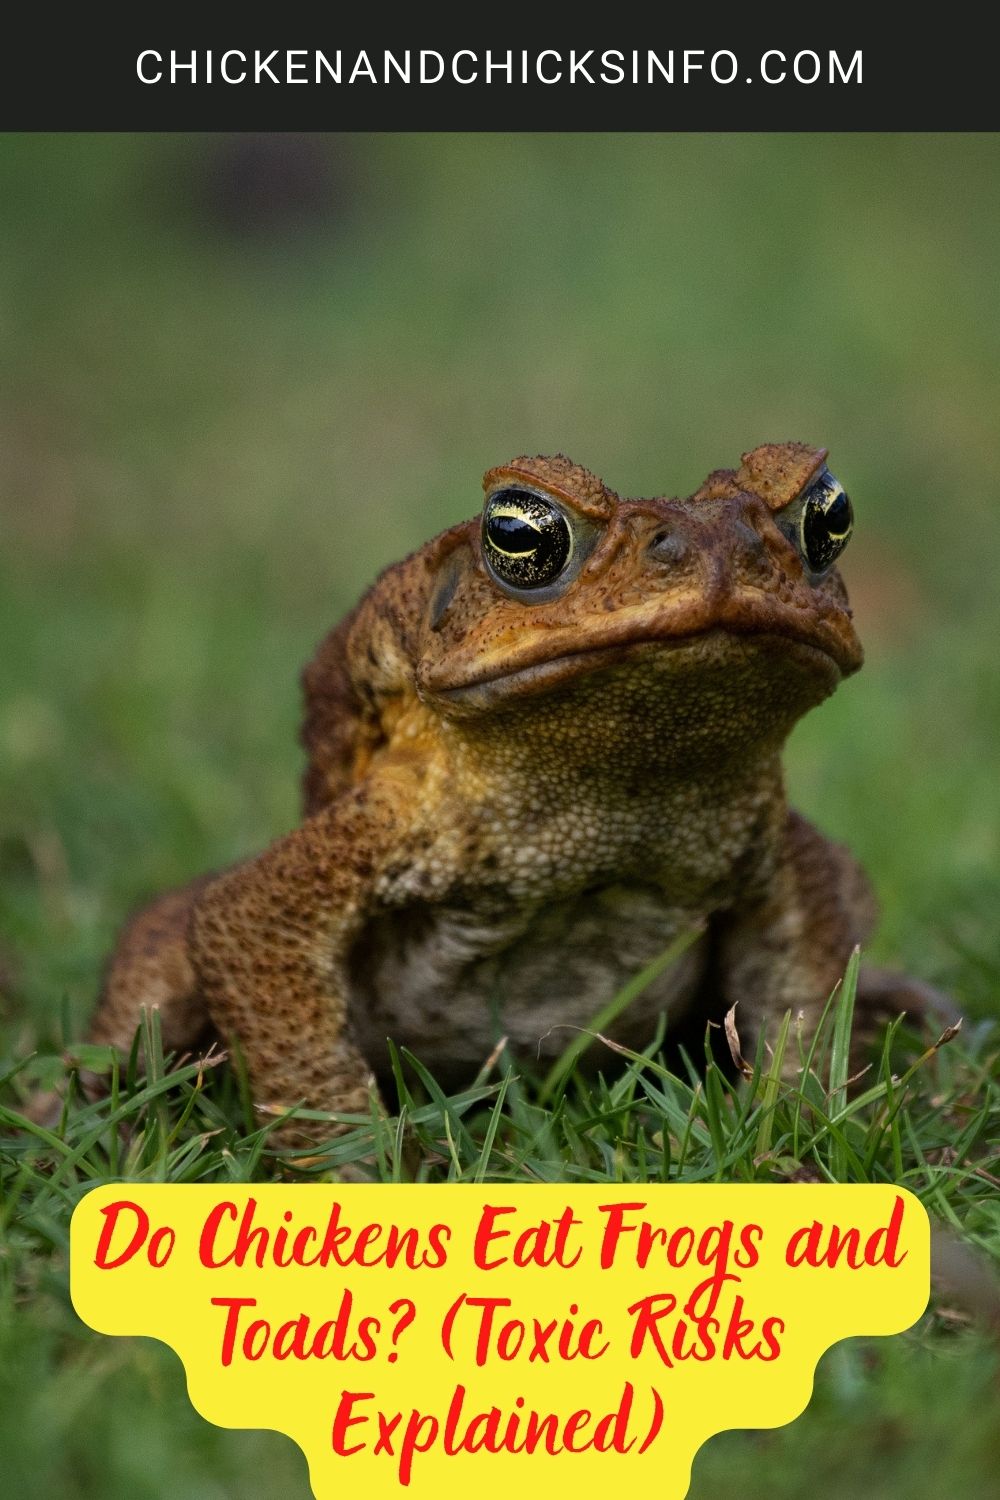 Do Chickens Eat Frogs and Toads? (Toxic Risks Explained) poster.
